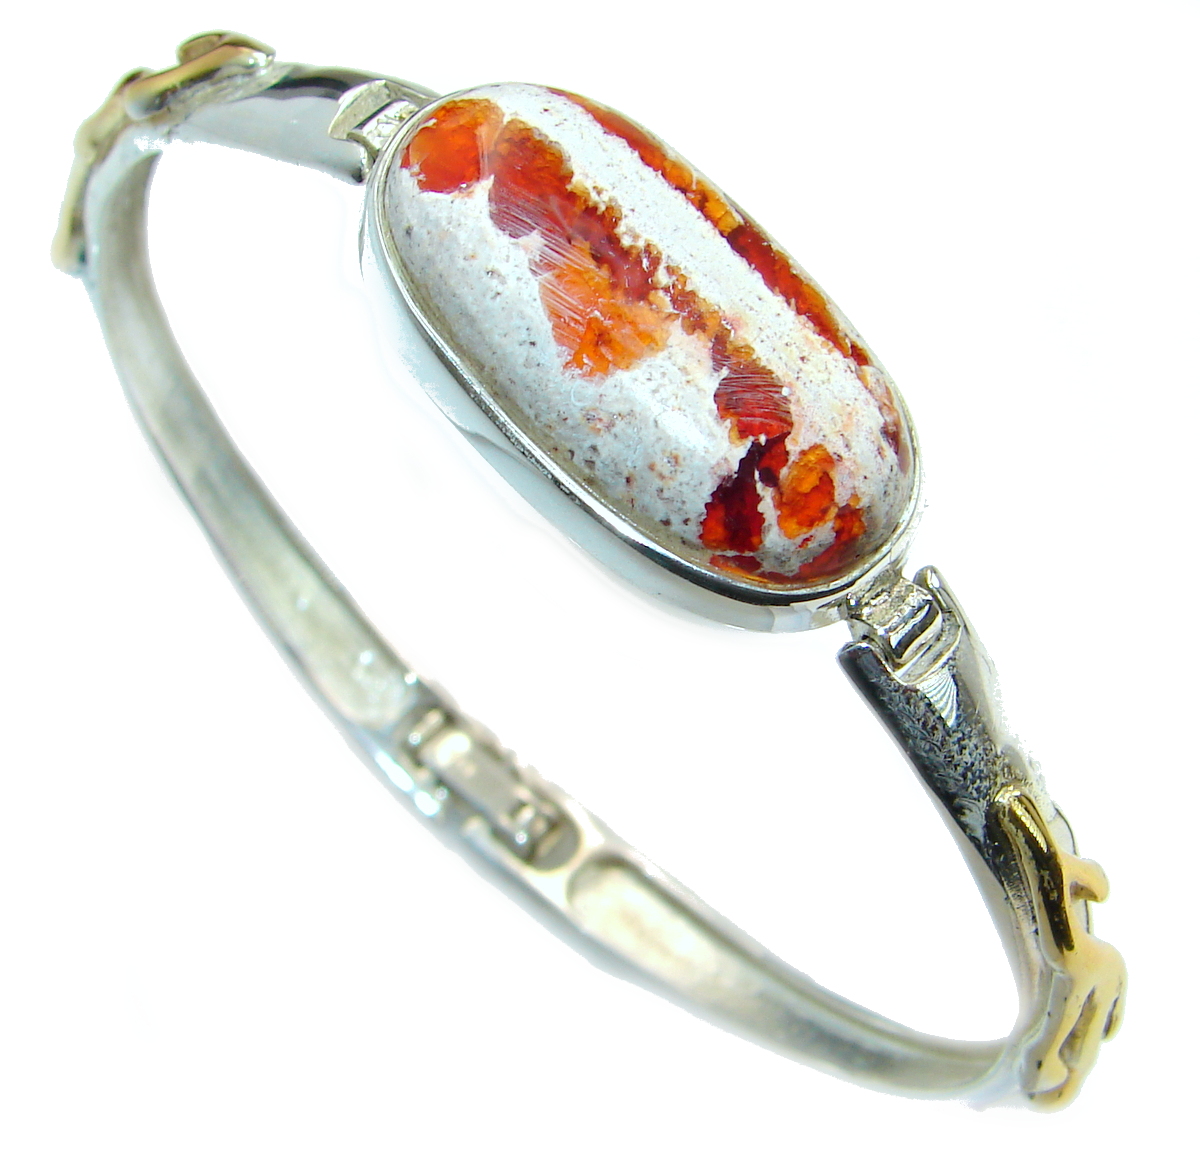 Handmade Artisan Sterling Silver 925 Bracelet with unique one of a kind Mexican Fire Opal,  13.50 grams of marvelous handcrafted jewelry design. Only one piece availble ready to ship! It's unique worldwide bracelet - simply piece of art in world of fine jewelry. Authentic Mexican Opal .925 Sterling Silver handcrafted Bracelet / Cuff  BRACELET DETAILS: Weight: 13.50g; Material: Sterling Silver; Main stone: Mexican Fire Opal; Other stones: ; Width (widest section): L - 5/8, w - 1, T - 1/4 inch; Inner circumference: 6-8 inch; Clasp: hidden; Stamp / Mark: 925; Condition: New; Main color: orange; Shape: abstract; Collection: In to The Woods;  Item Code: 31-sie-18-108